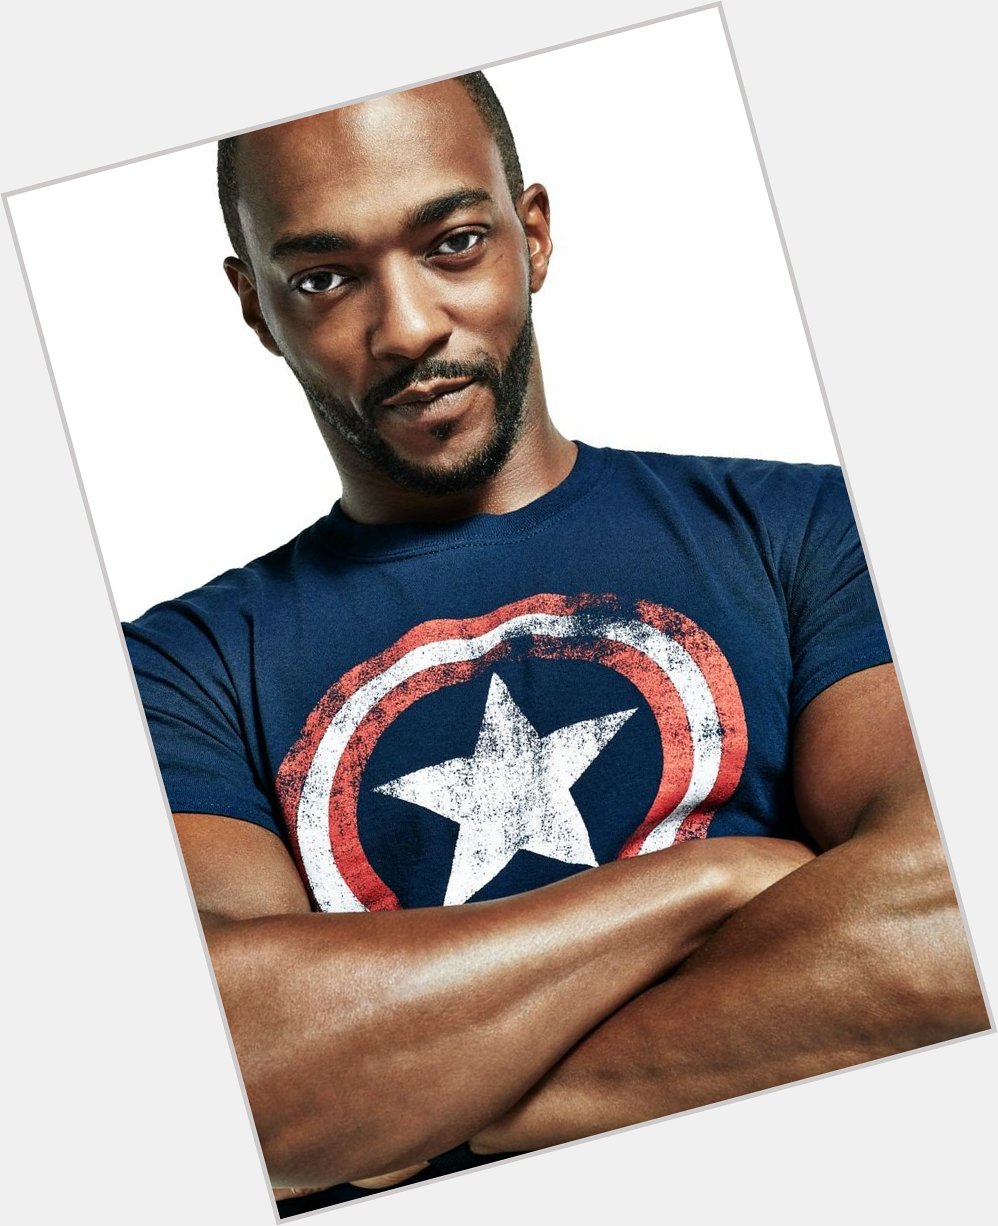 Happy birthday to the one and only anthony mackie   LETS HEAR IT FOR CAPTAIN AMERICA GUYS 